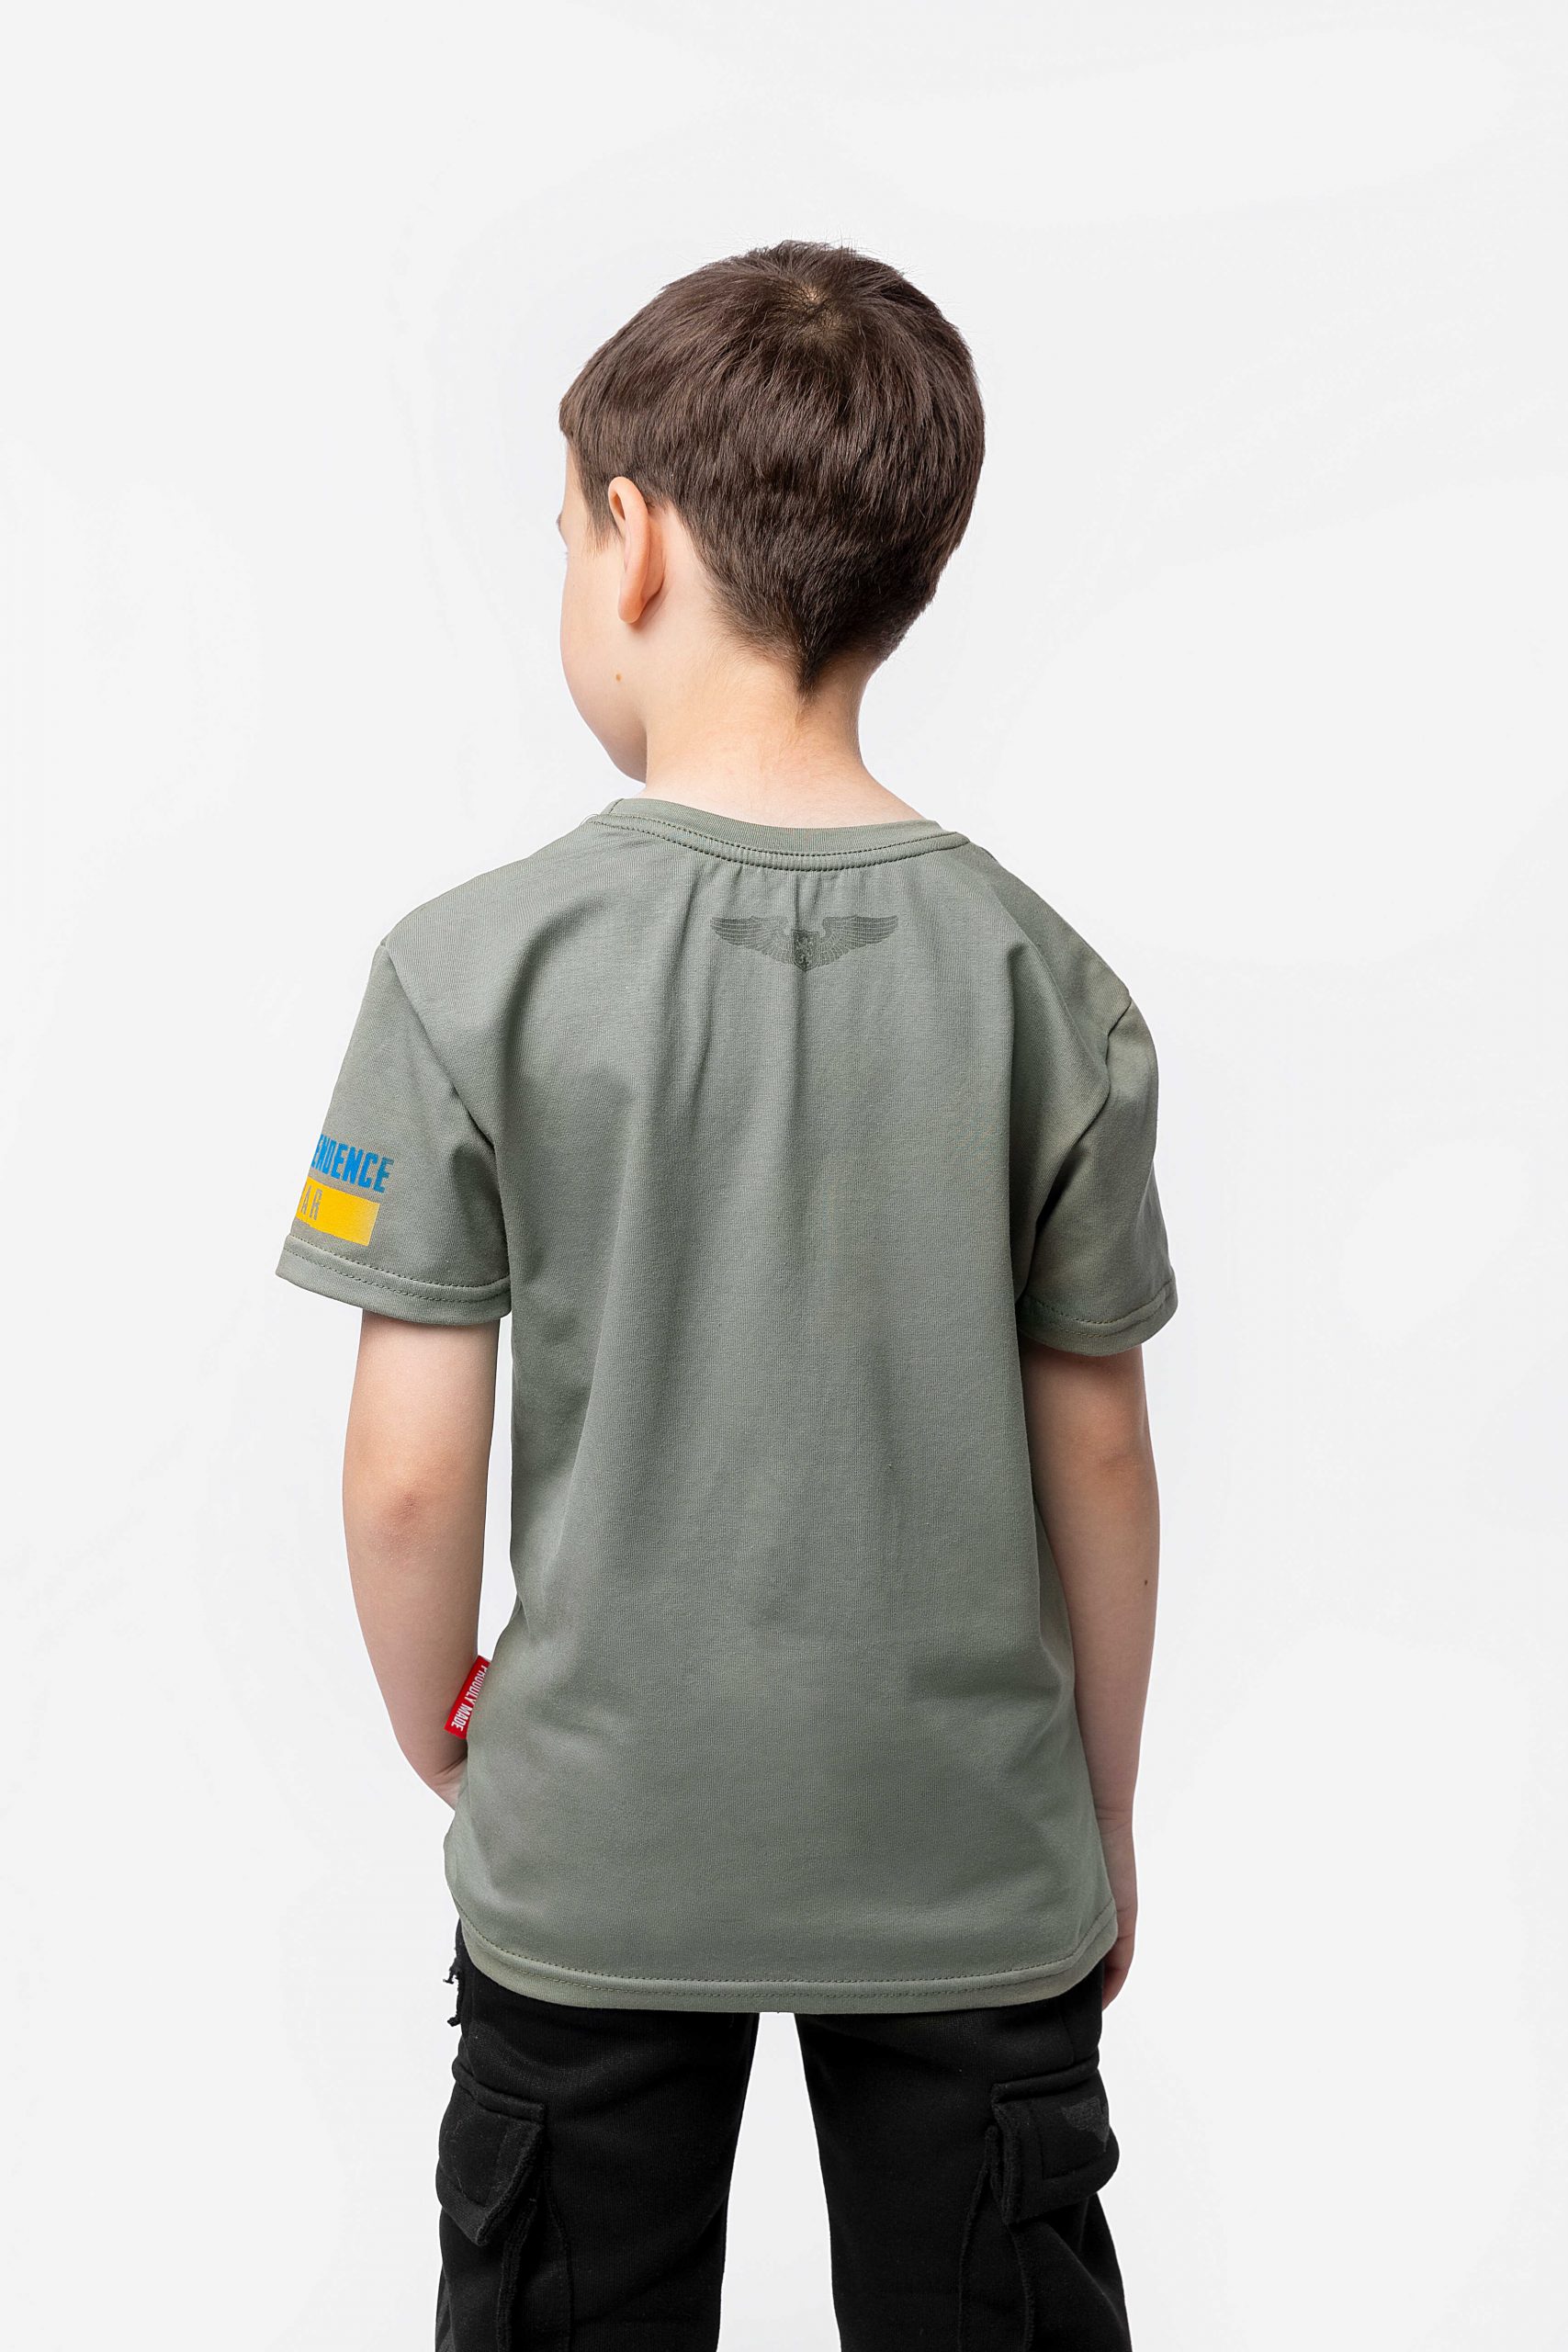 Kids T-Shirt We Are From Ukraine.h. Color khaki.  The color shades on your screen may differ from the original color.